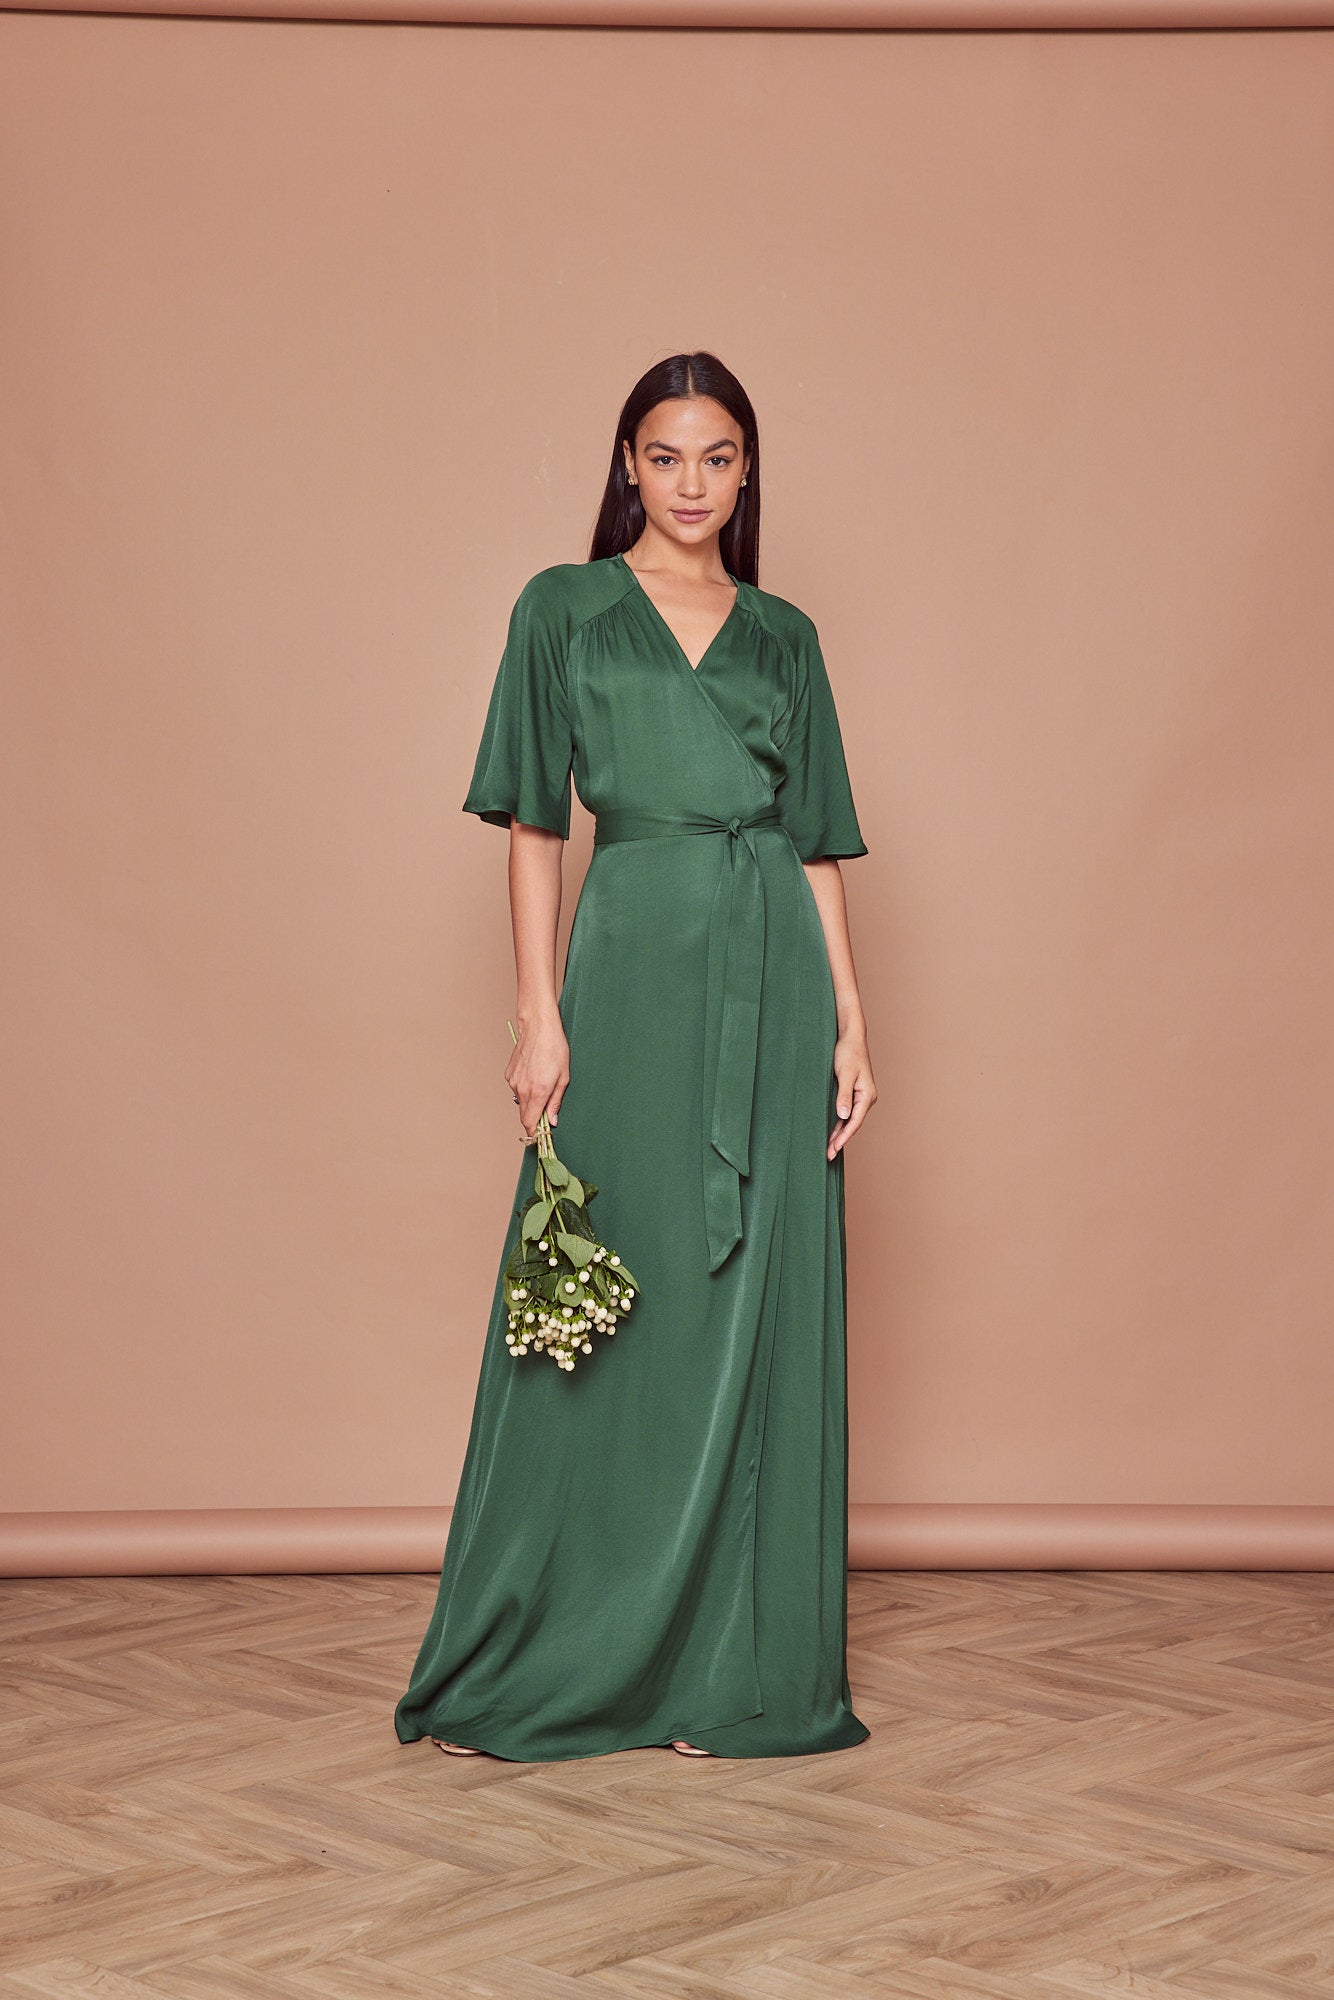 Margot Satin Wrap Dress - Forest Green - Maids to Measure